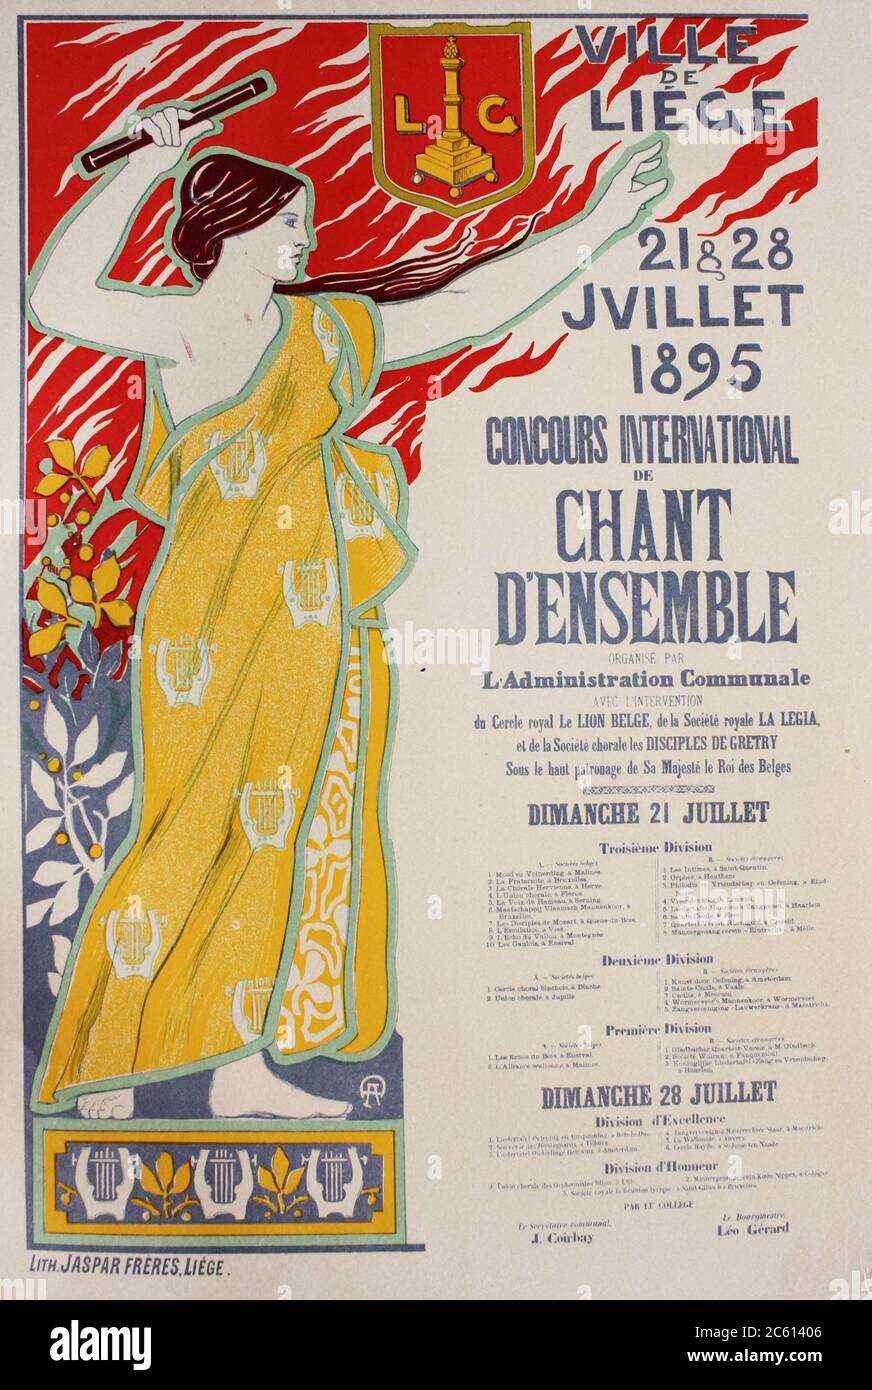 The poster of advertisment of song contest in the vintage book Les Maitres de L'Affiche, by Roger Marx, 1897. Stock Photo